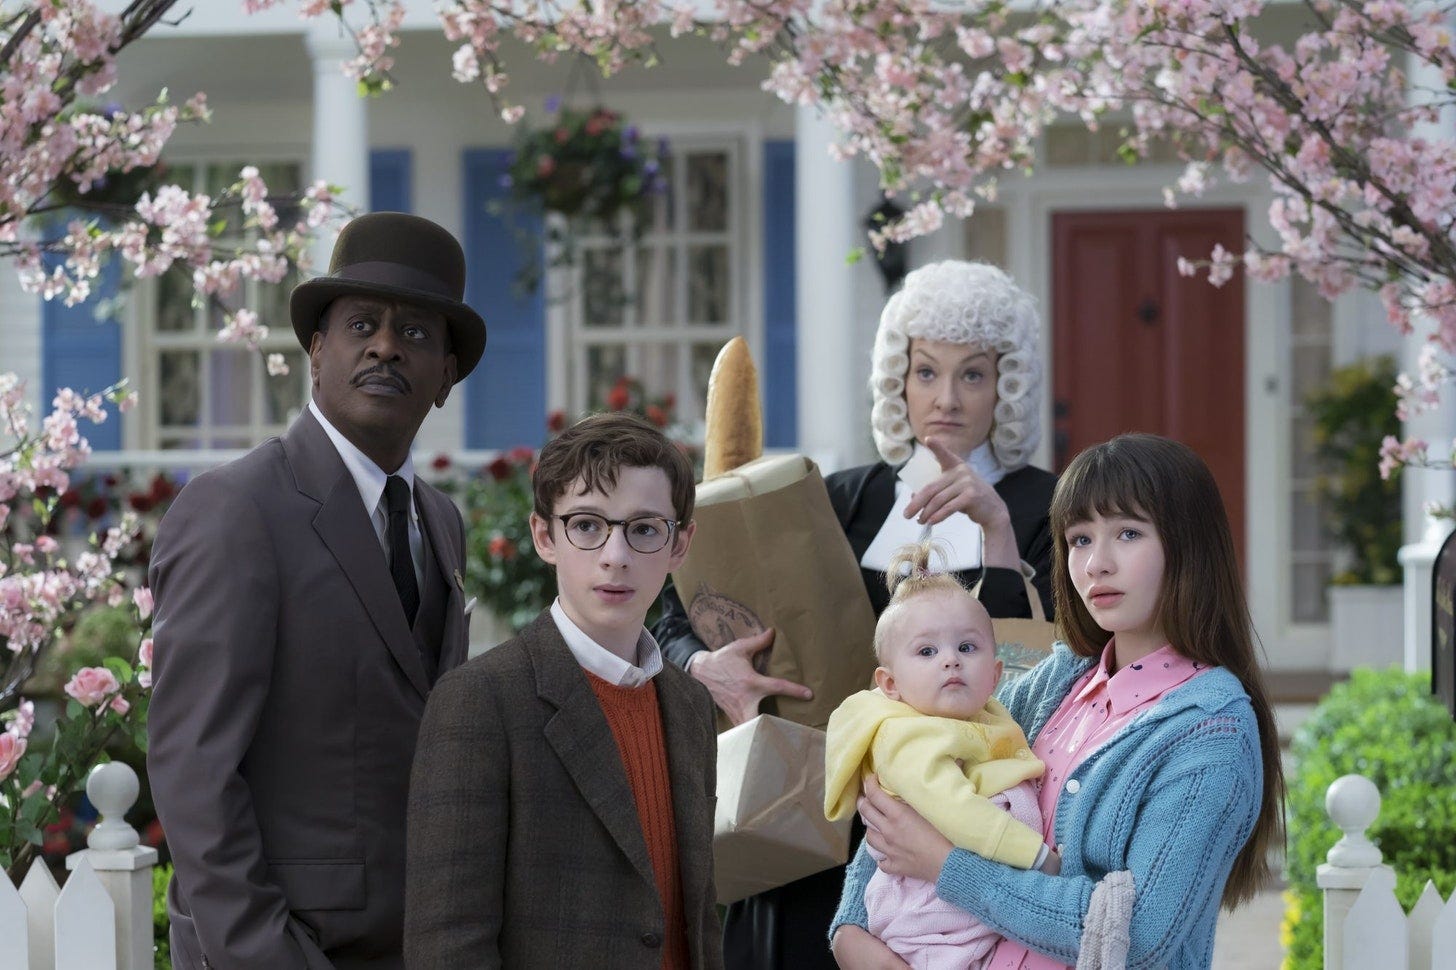 Lemony Snicket speaks out about Netflix's Series of Unfortunate Events |  EW.com